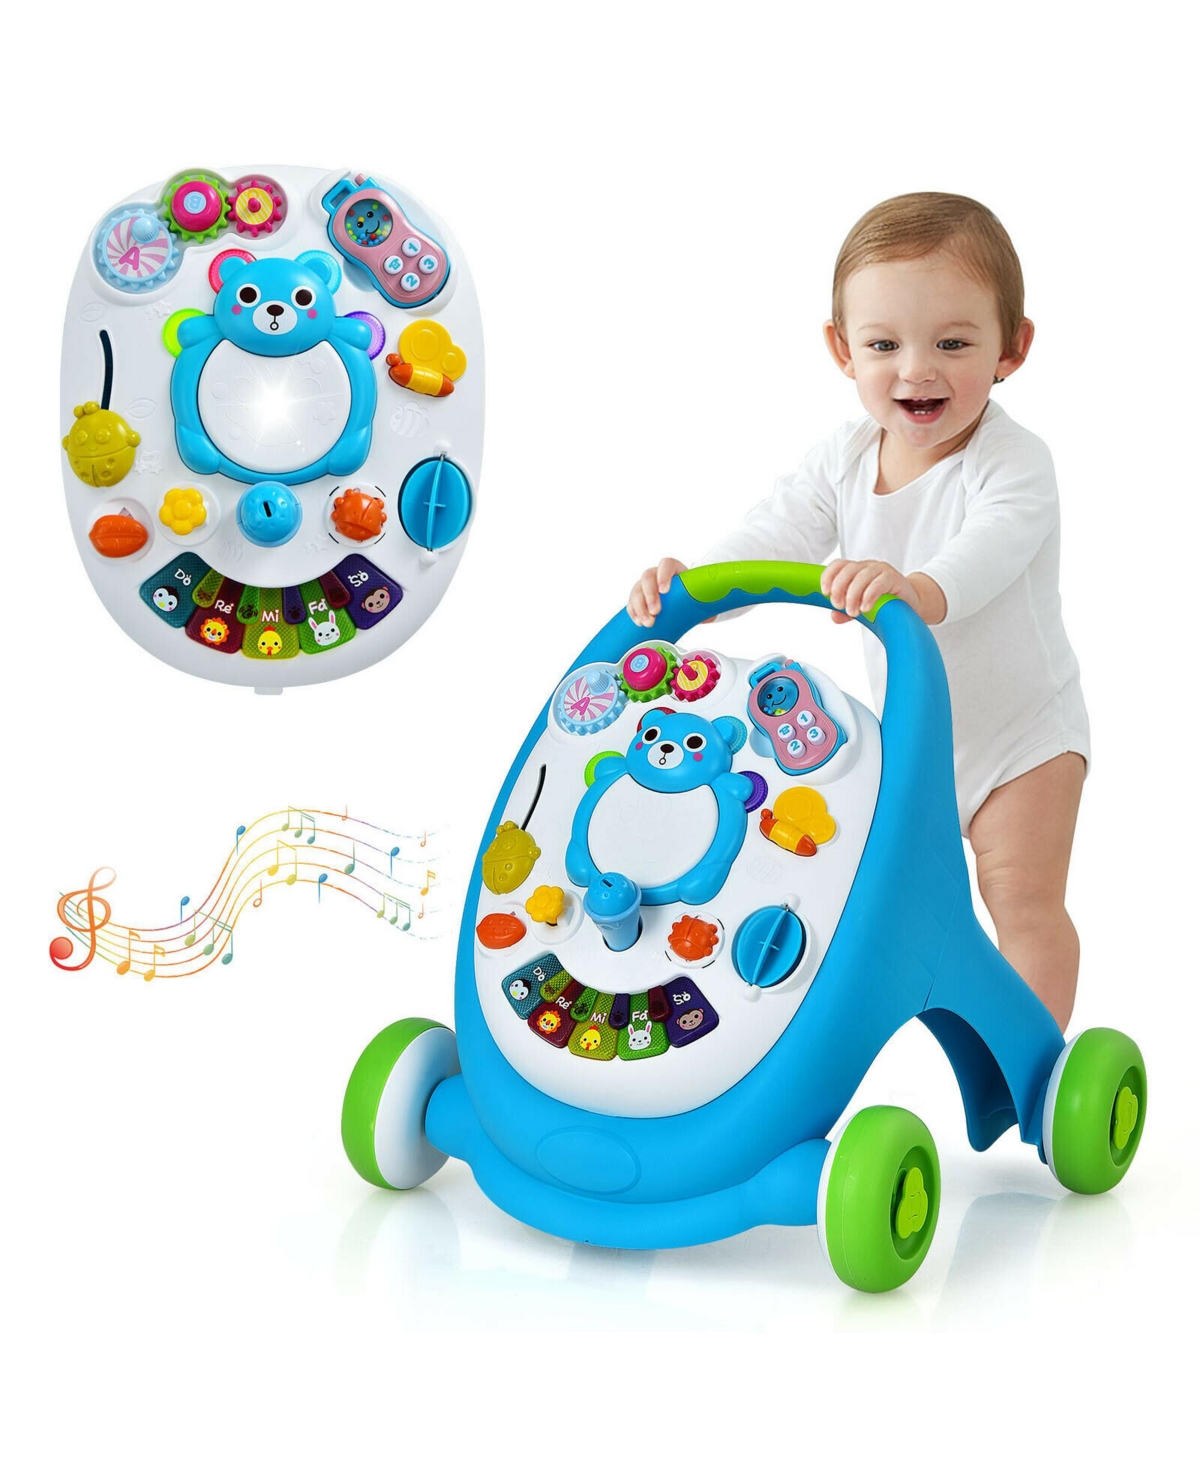 Costway Babies' Sit-to-stand Learning Walker Toddler Push Walking Toy In Blue